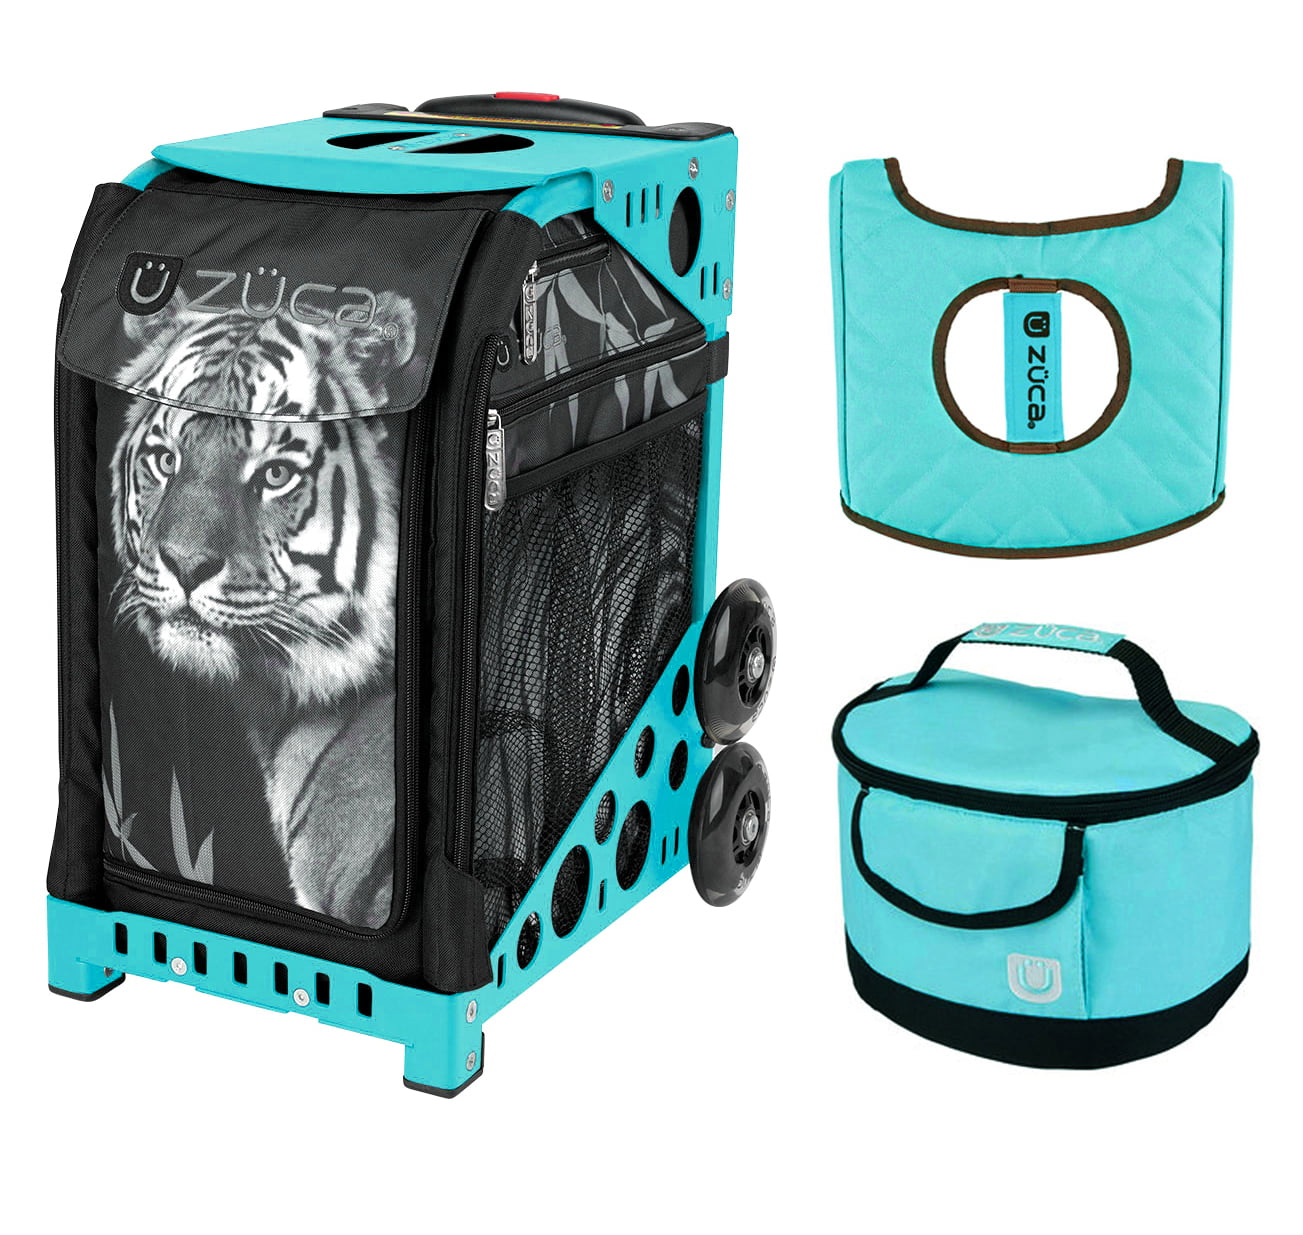 GIFT Lunchbox & Seat Cushion Zuca Bag TIGER Sport Insert and Green Frame 